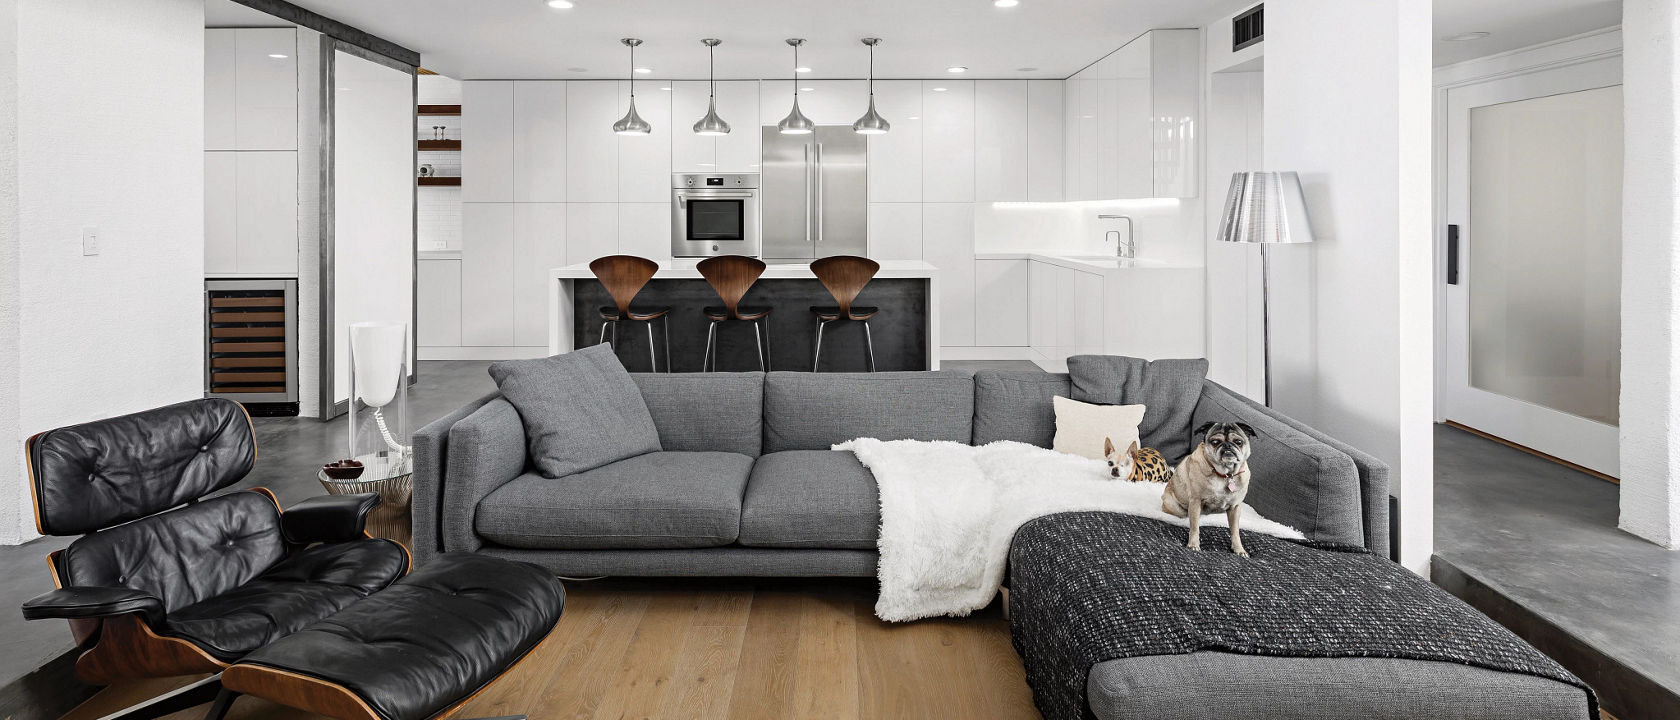 A contemporary living room with a gray couch, black leather chair, wooden flooring, and raised ceilings. 